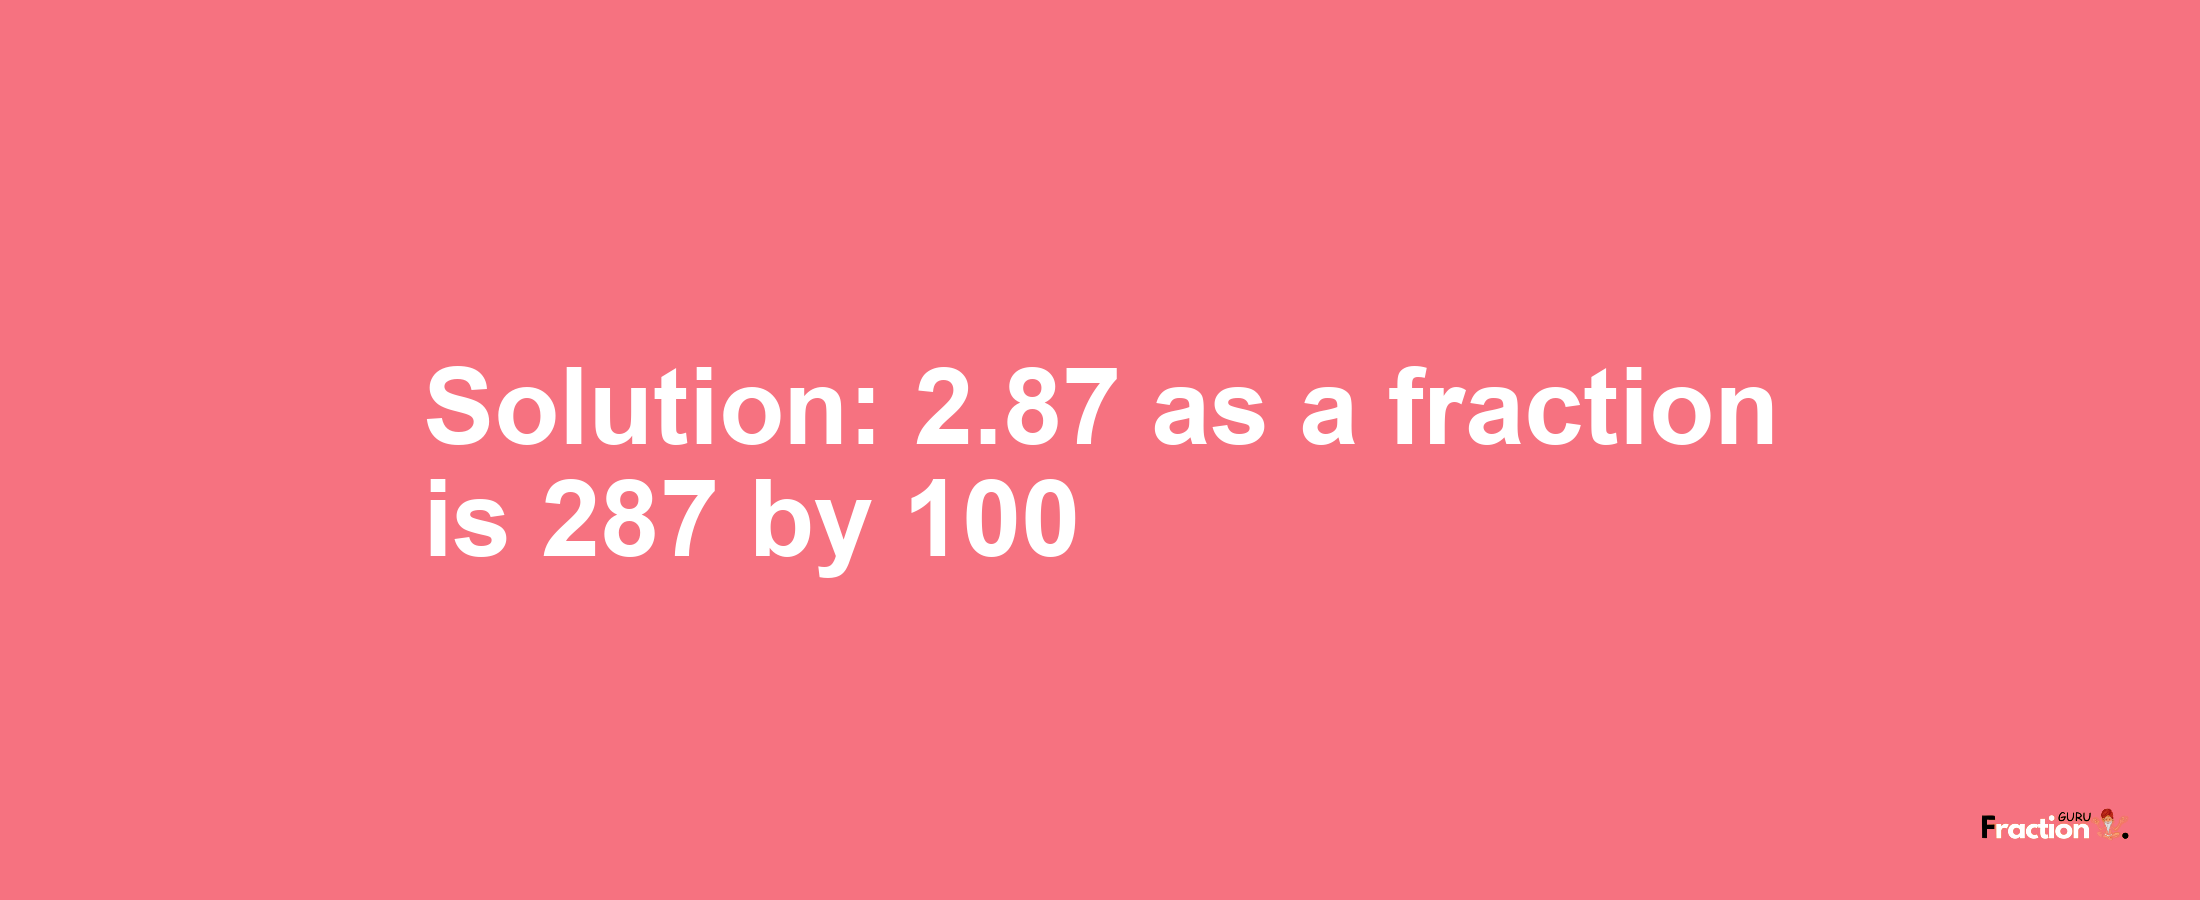 Solution:2.87 as a fraction is 287/100